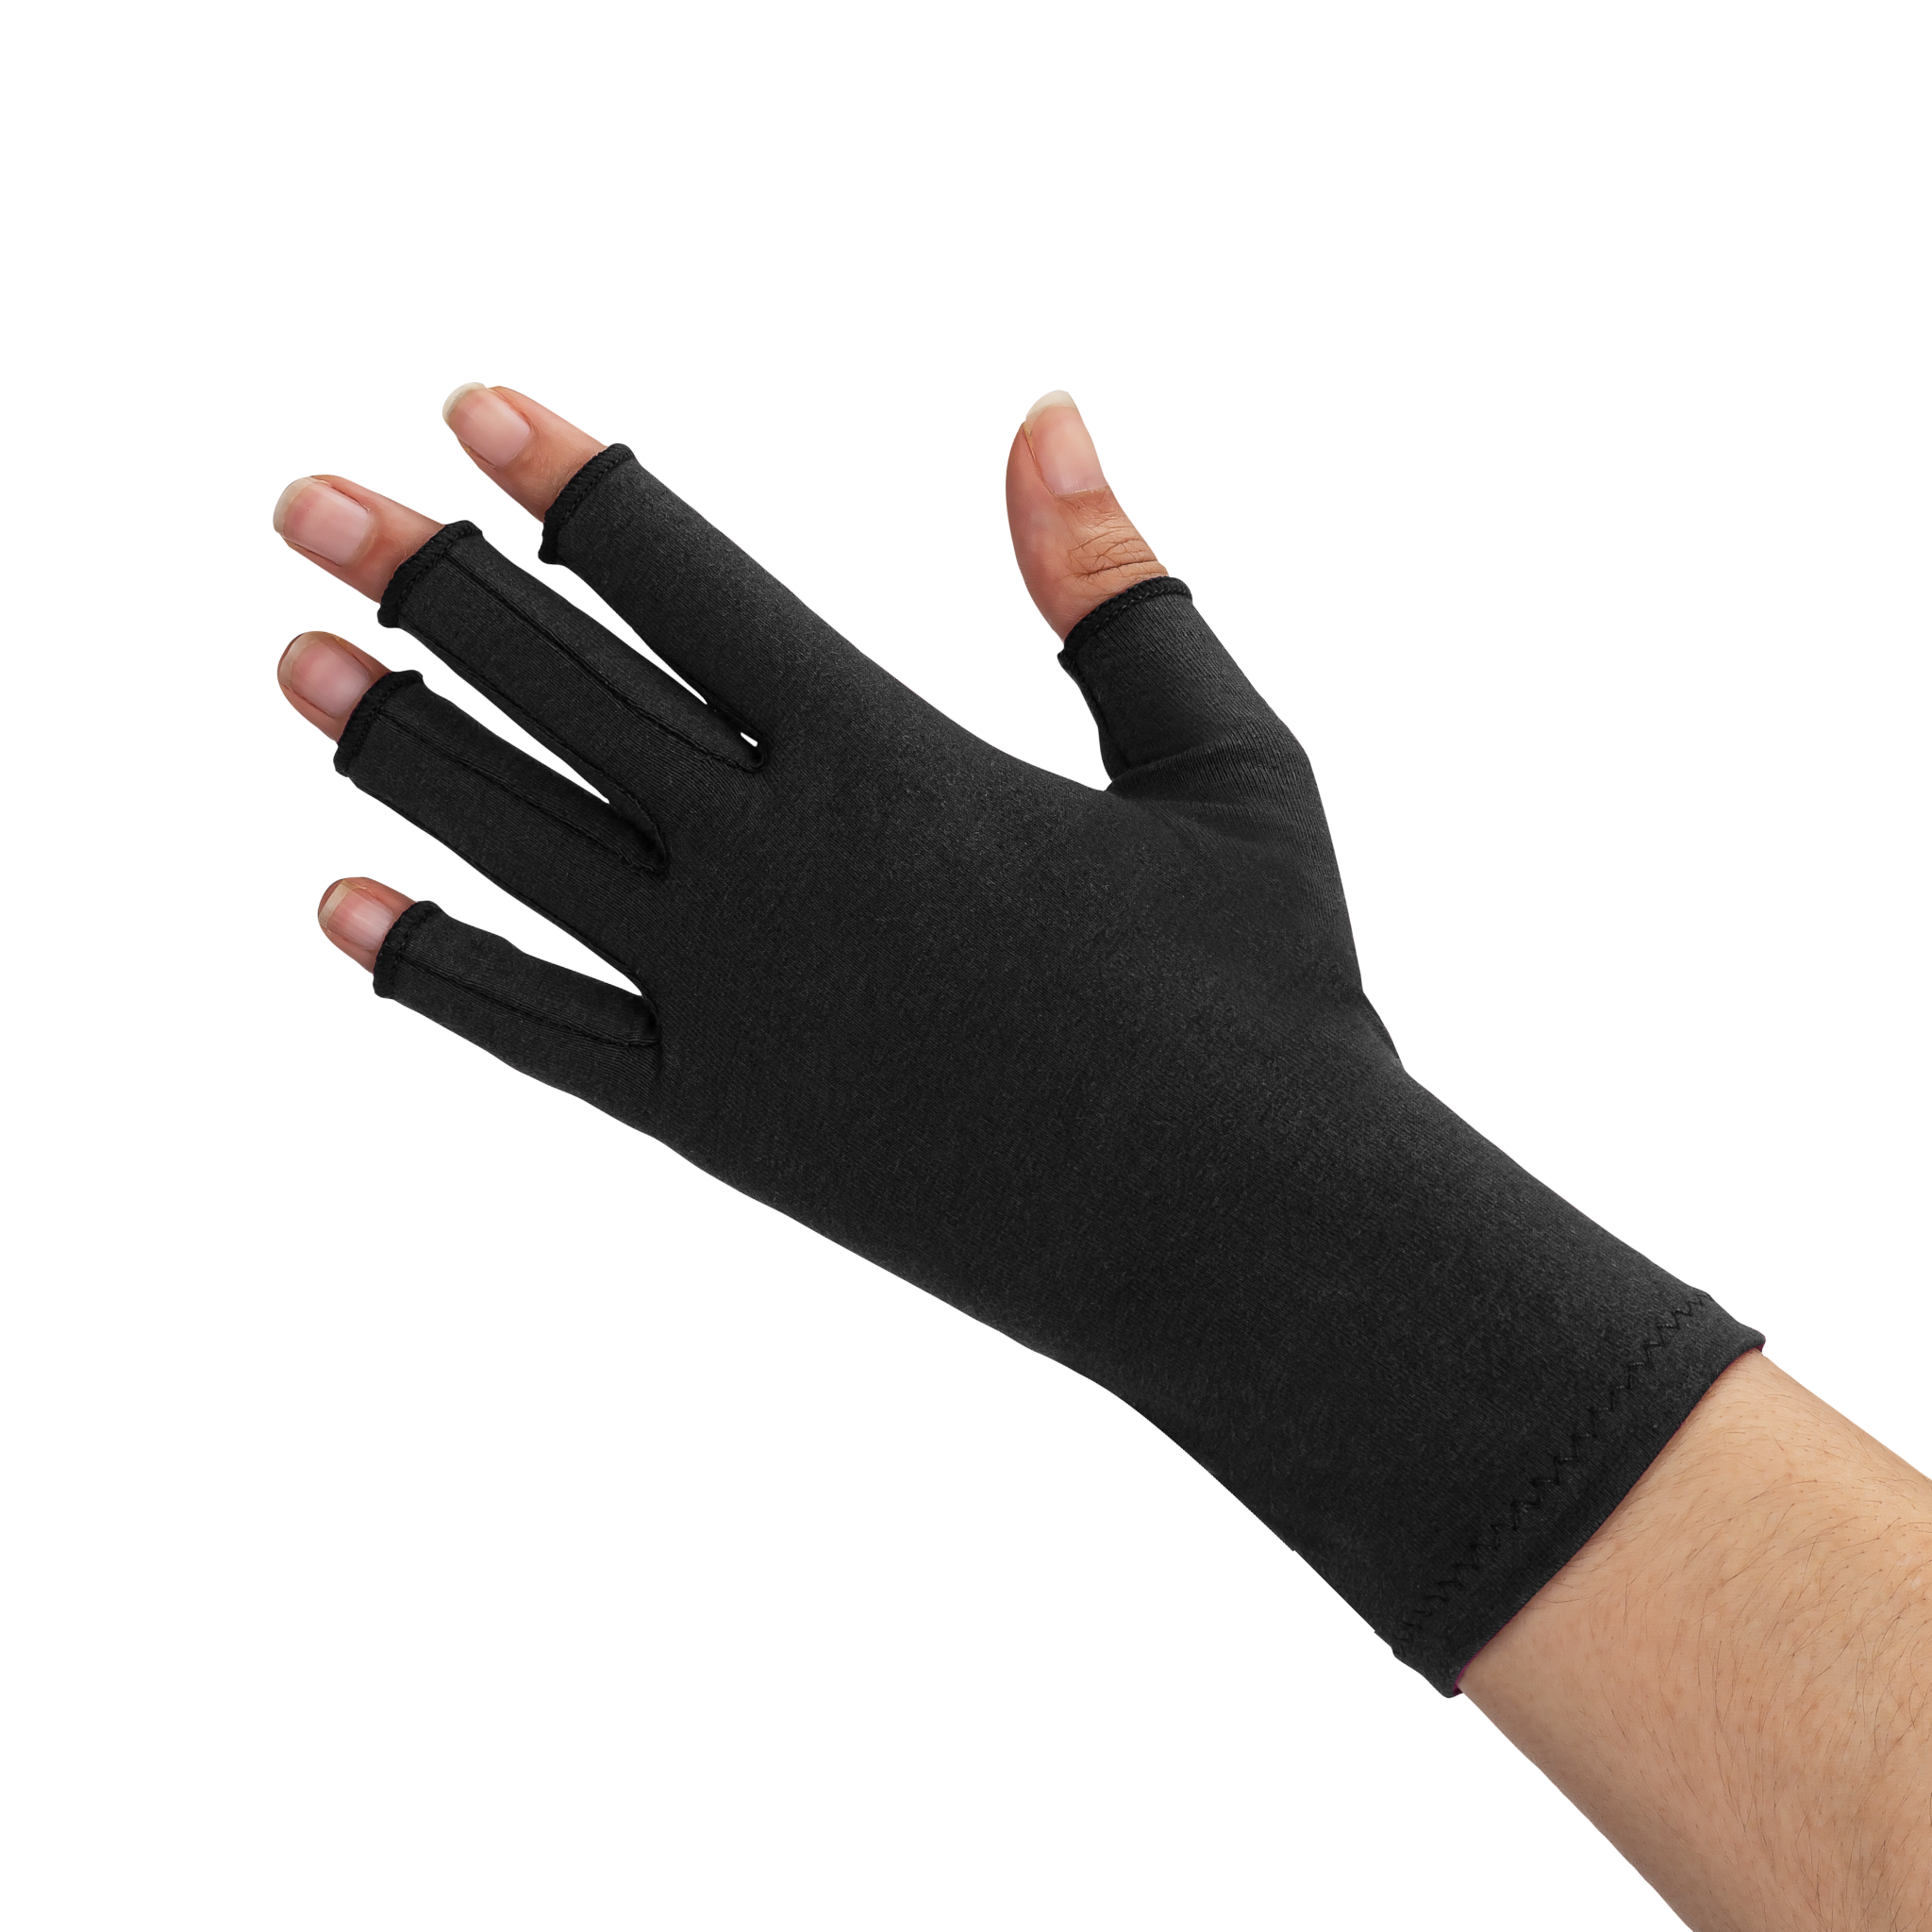 How to Make Fancy Spandex Gloves - Spandex Simplified